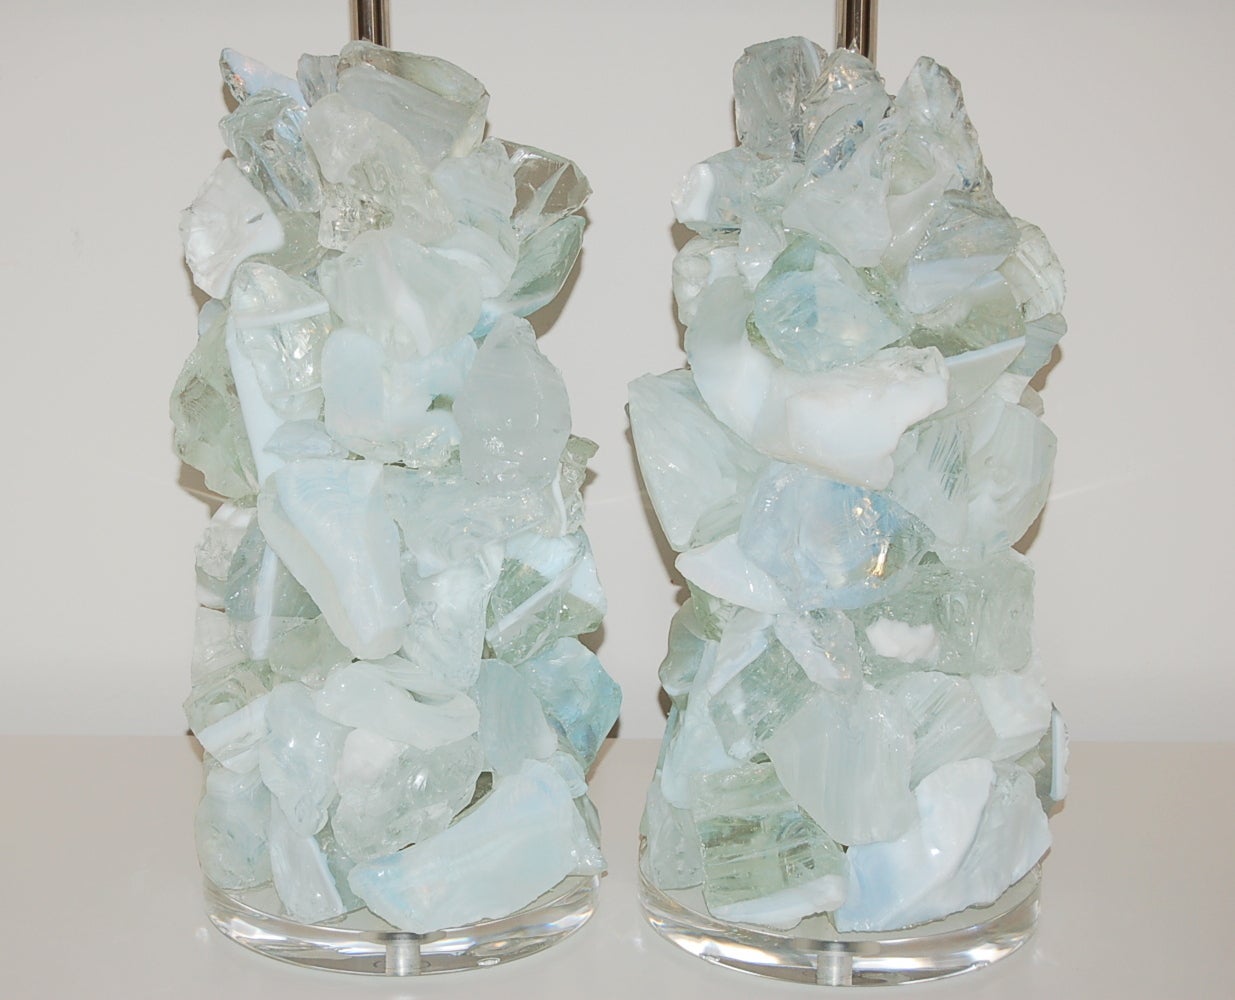 American Matched Pair of Rock Candy Lamps in White Opaline